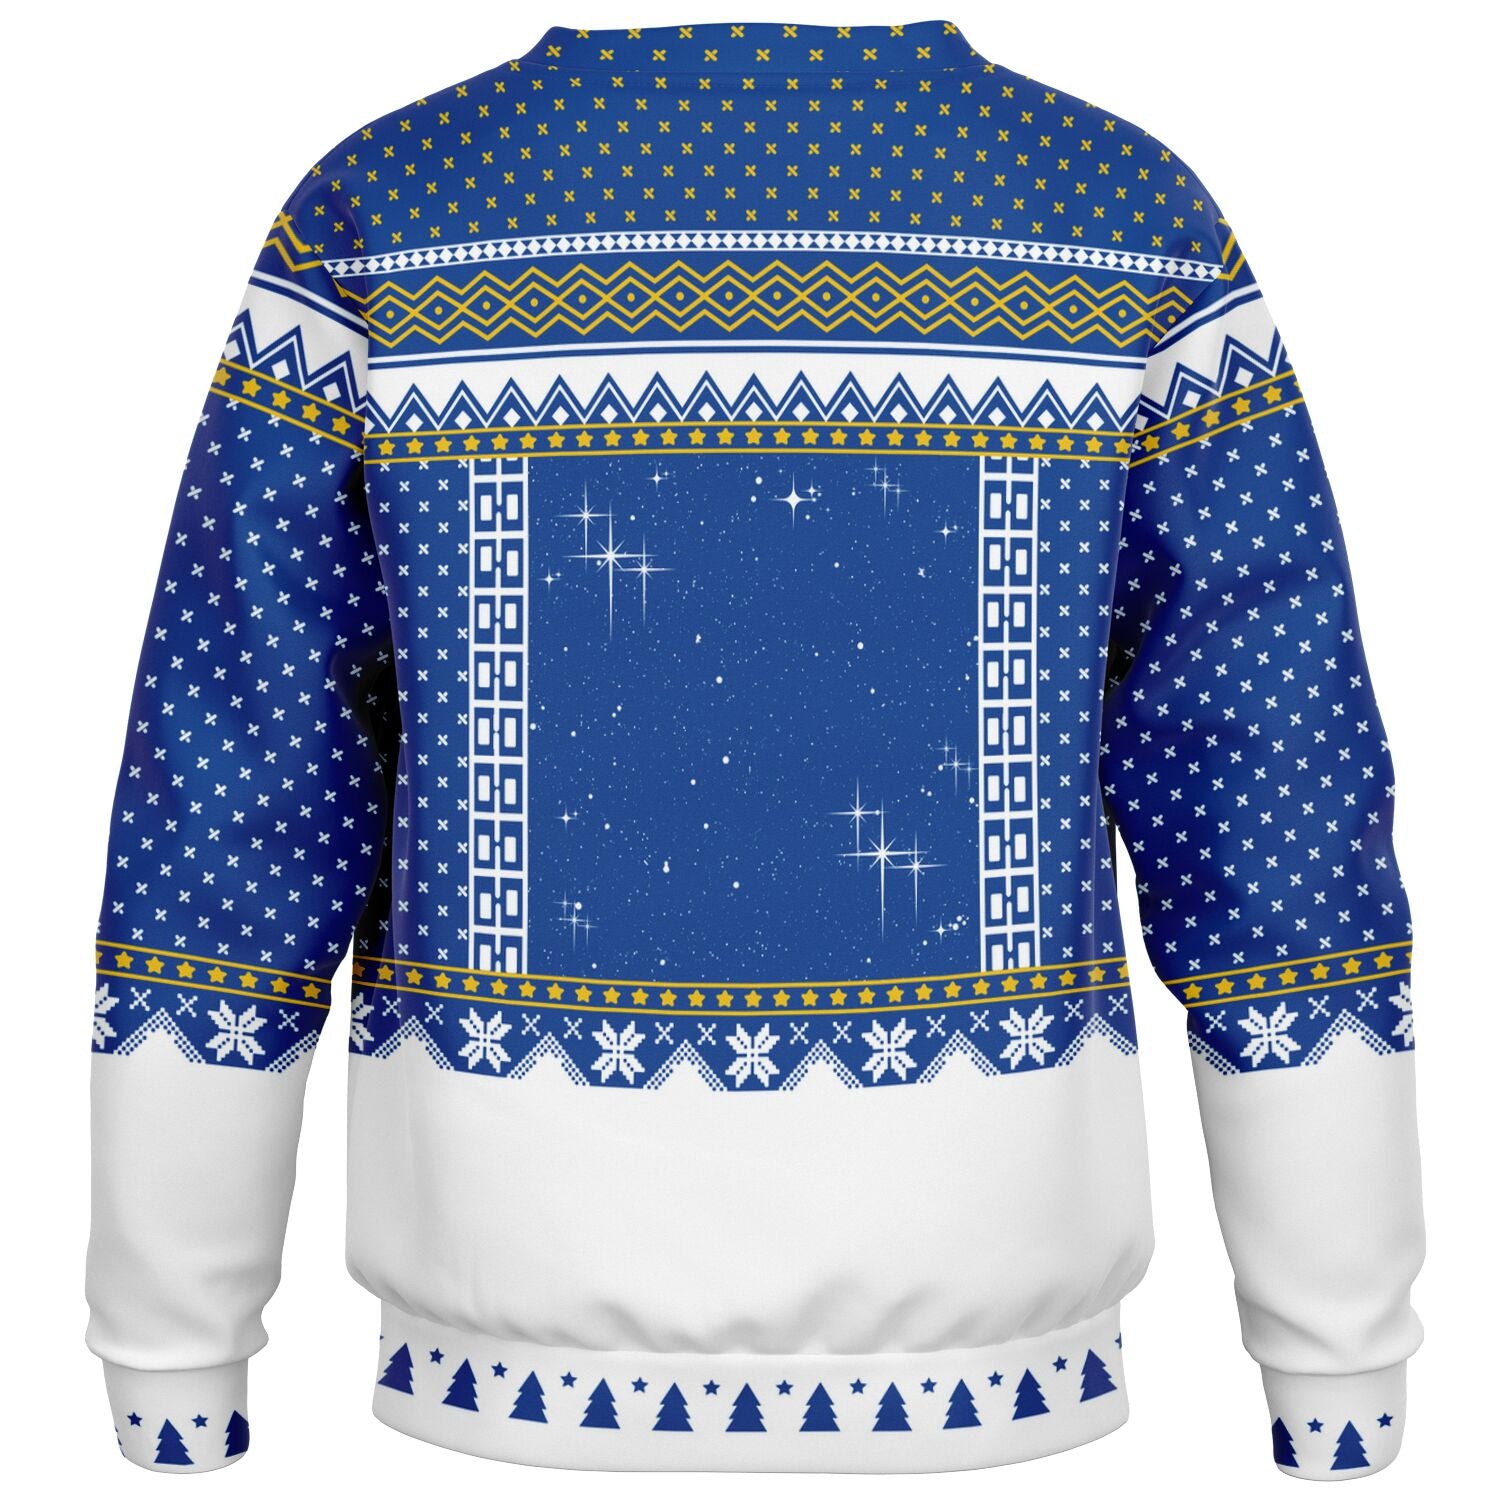 Ugly Holiday Sweater-Snow Globe-Kids/Youth